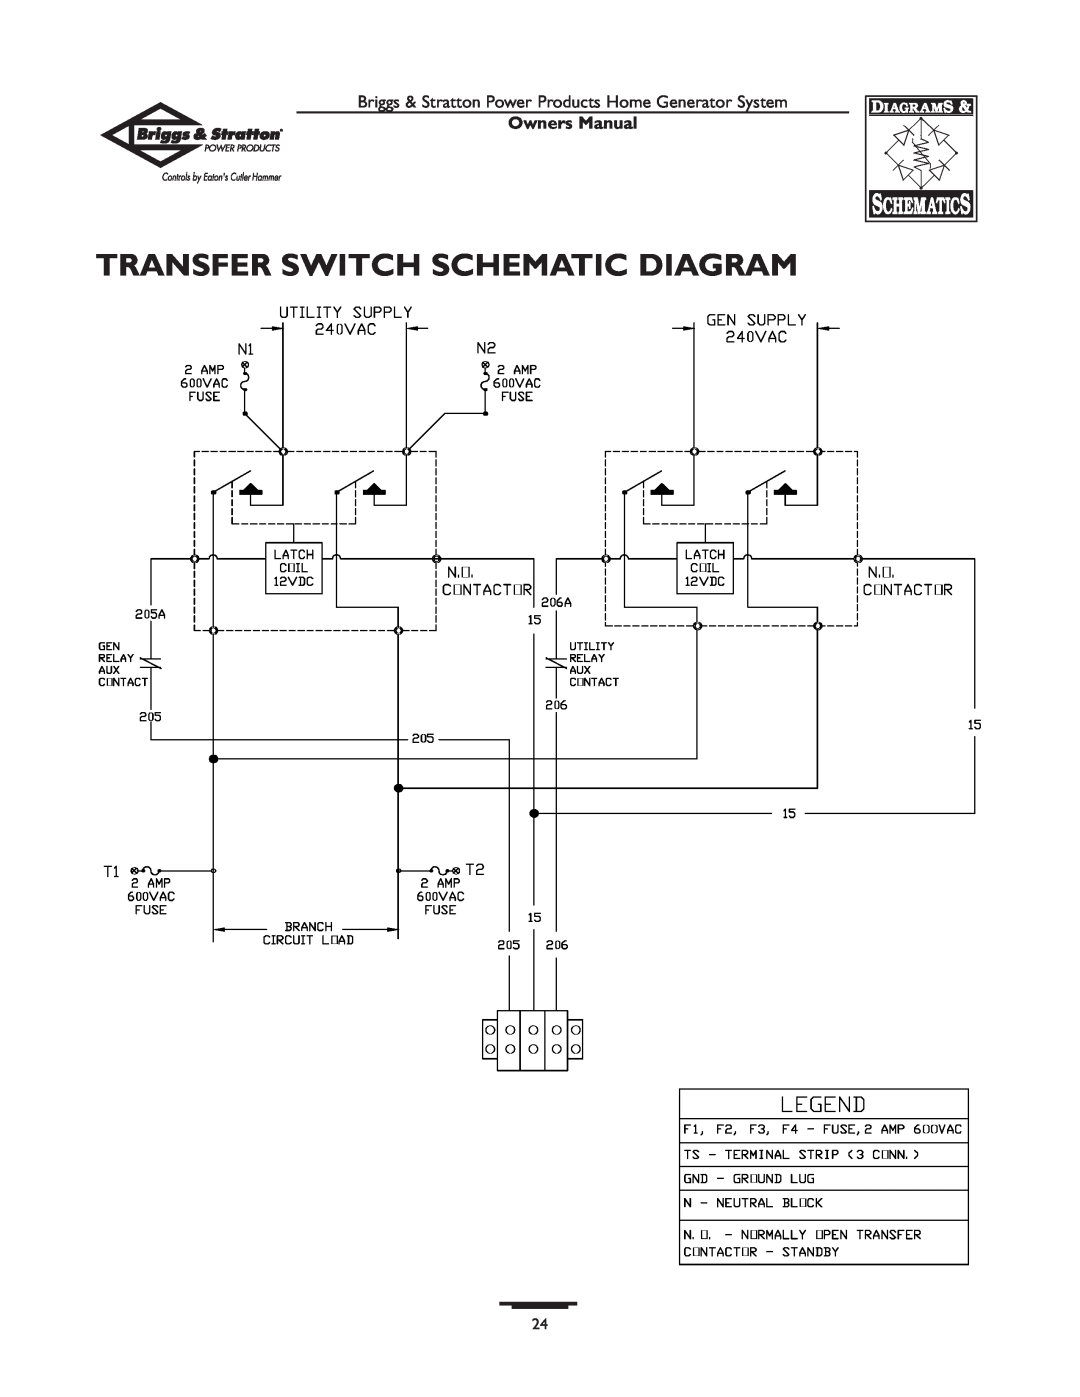 Briggs & Stratton 1679-0 owner manual Transfer Switch Schematic Diagram, Owners Manual 